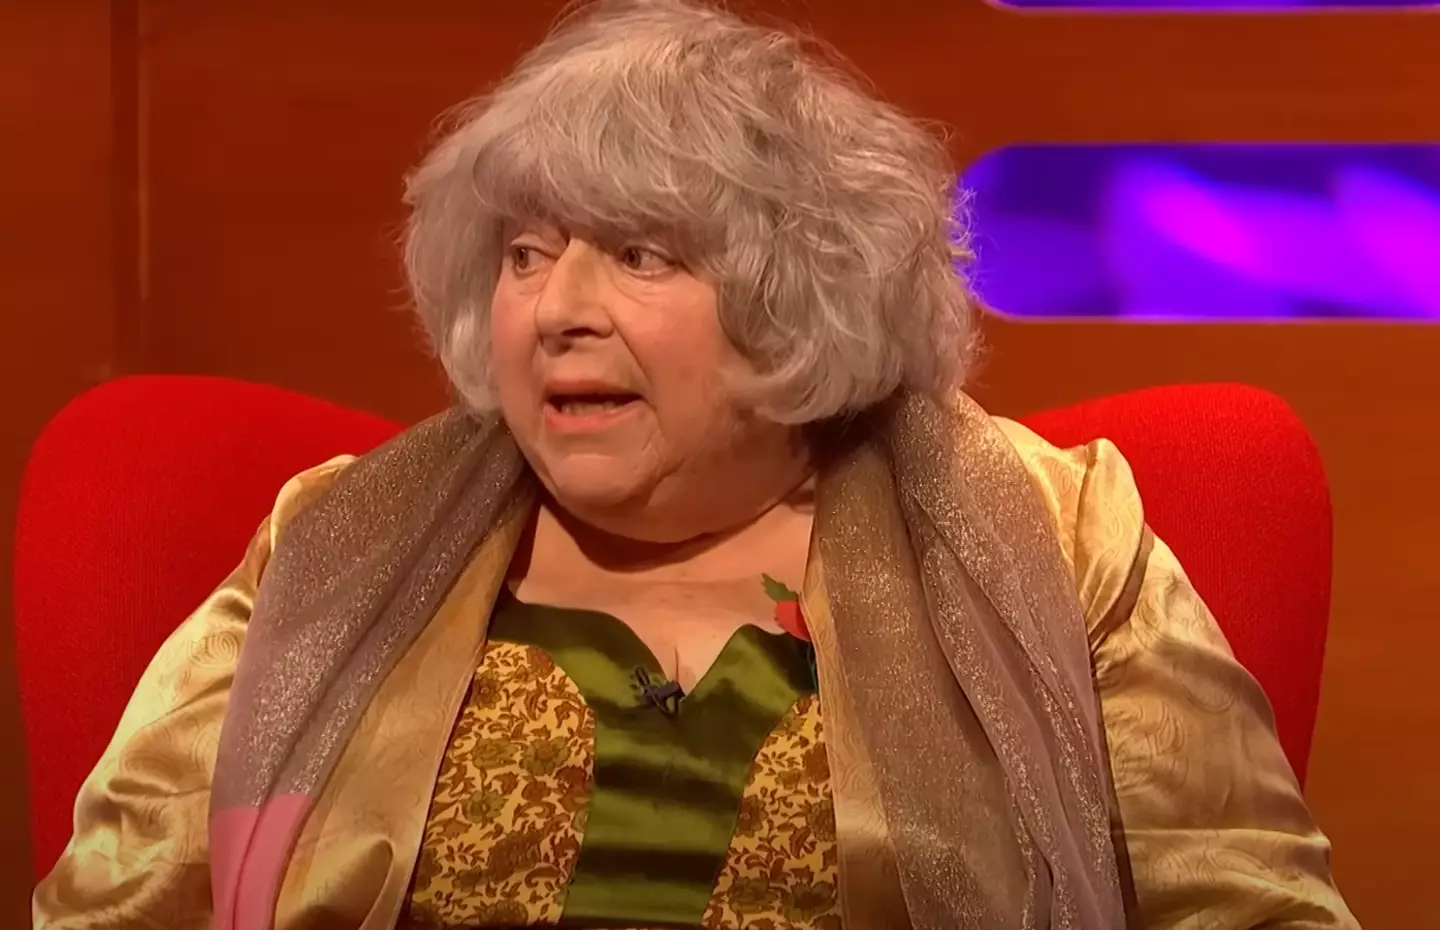 Miriam Margolyes has opened up about her health struggles.